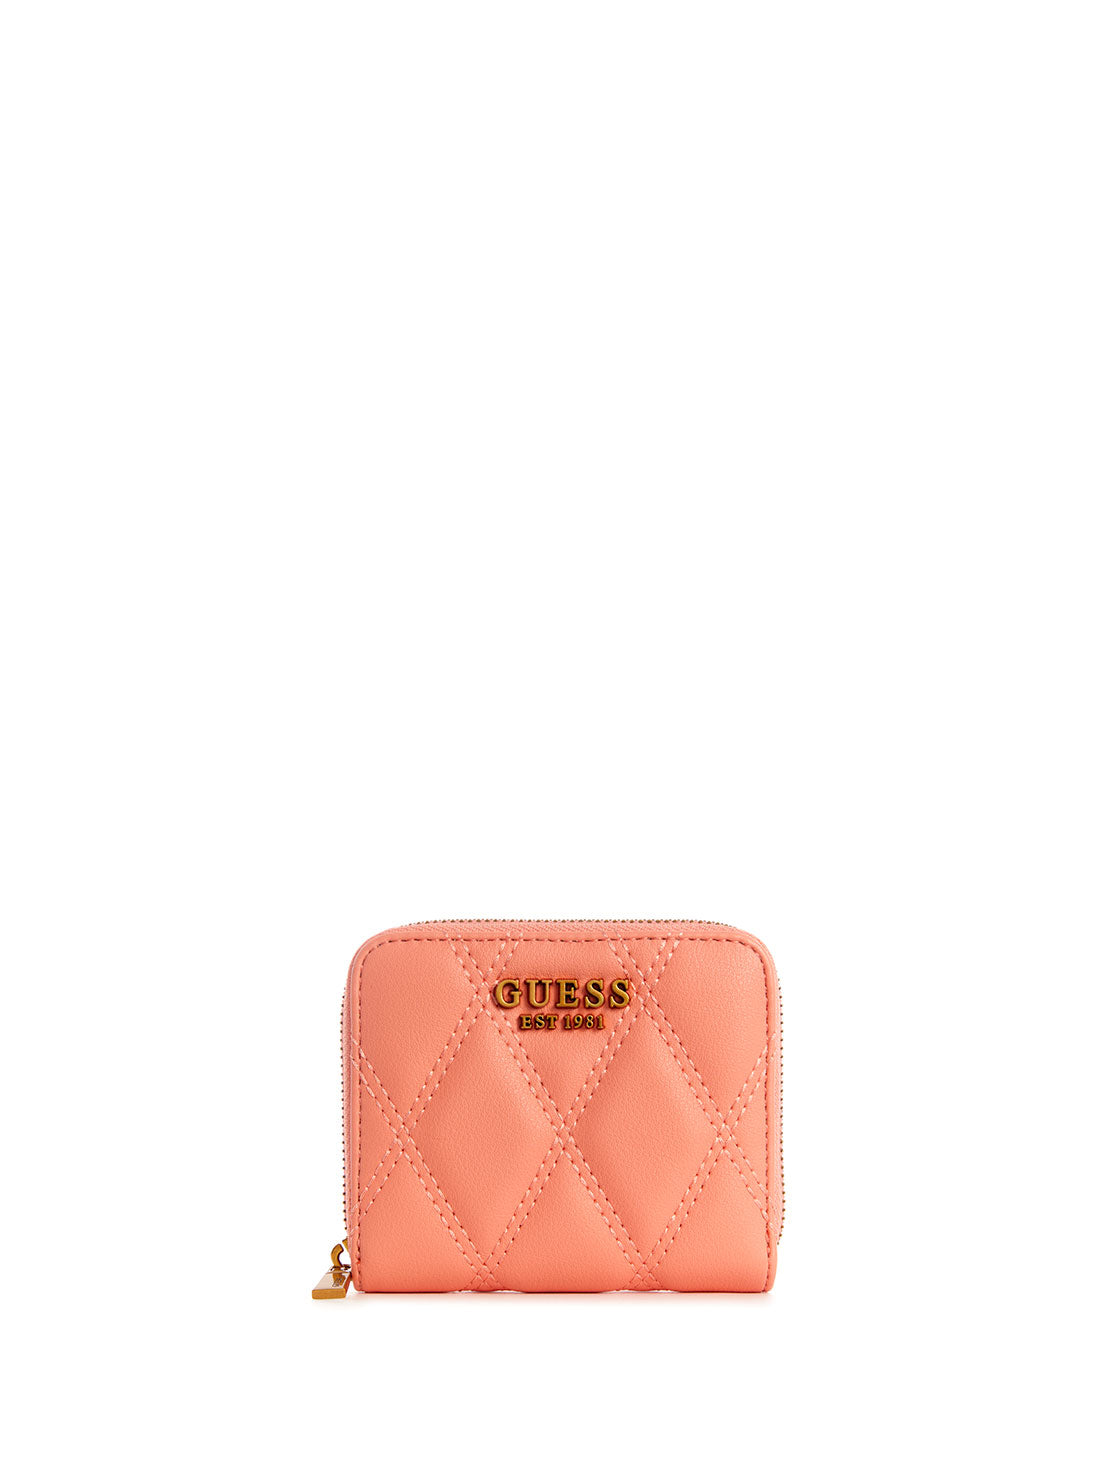 GUESS Womens Orange Triana Small Zip Wallet QS855337 Front View